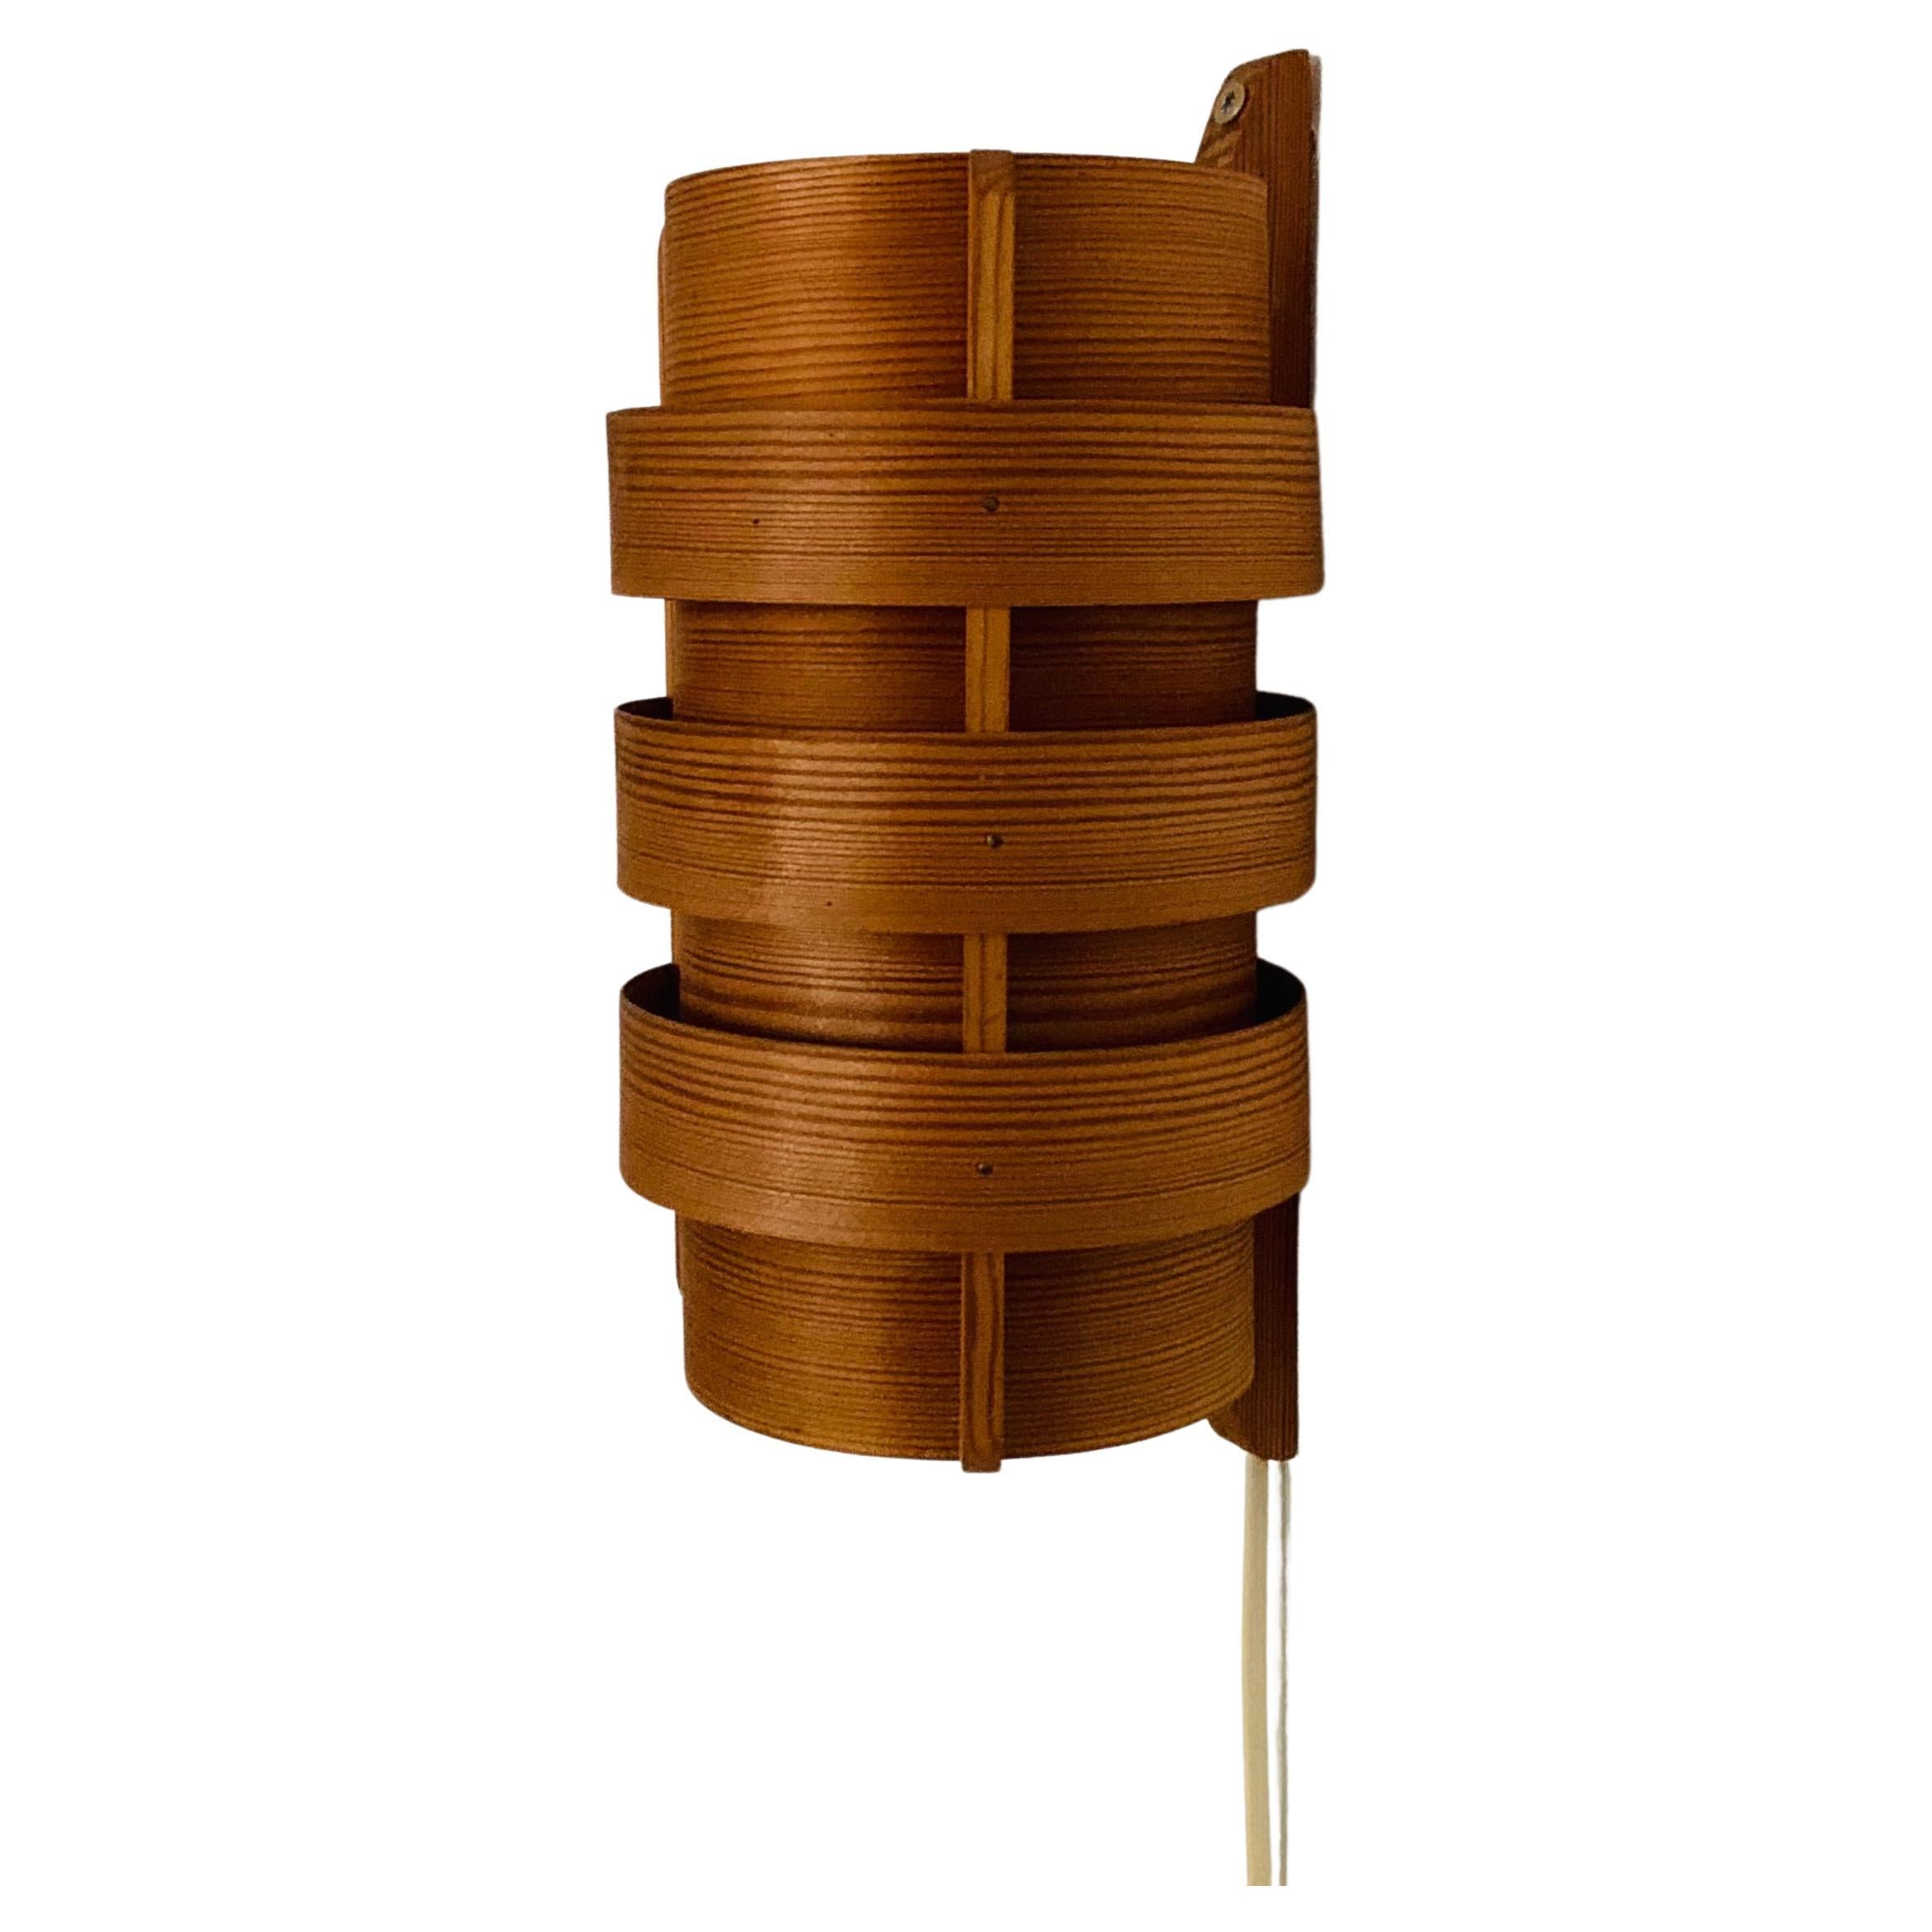 Wooden Wall Lamp by Hans Agne Jakobsson